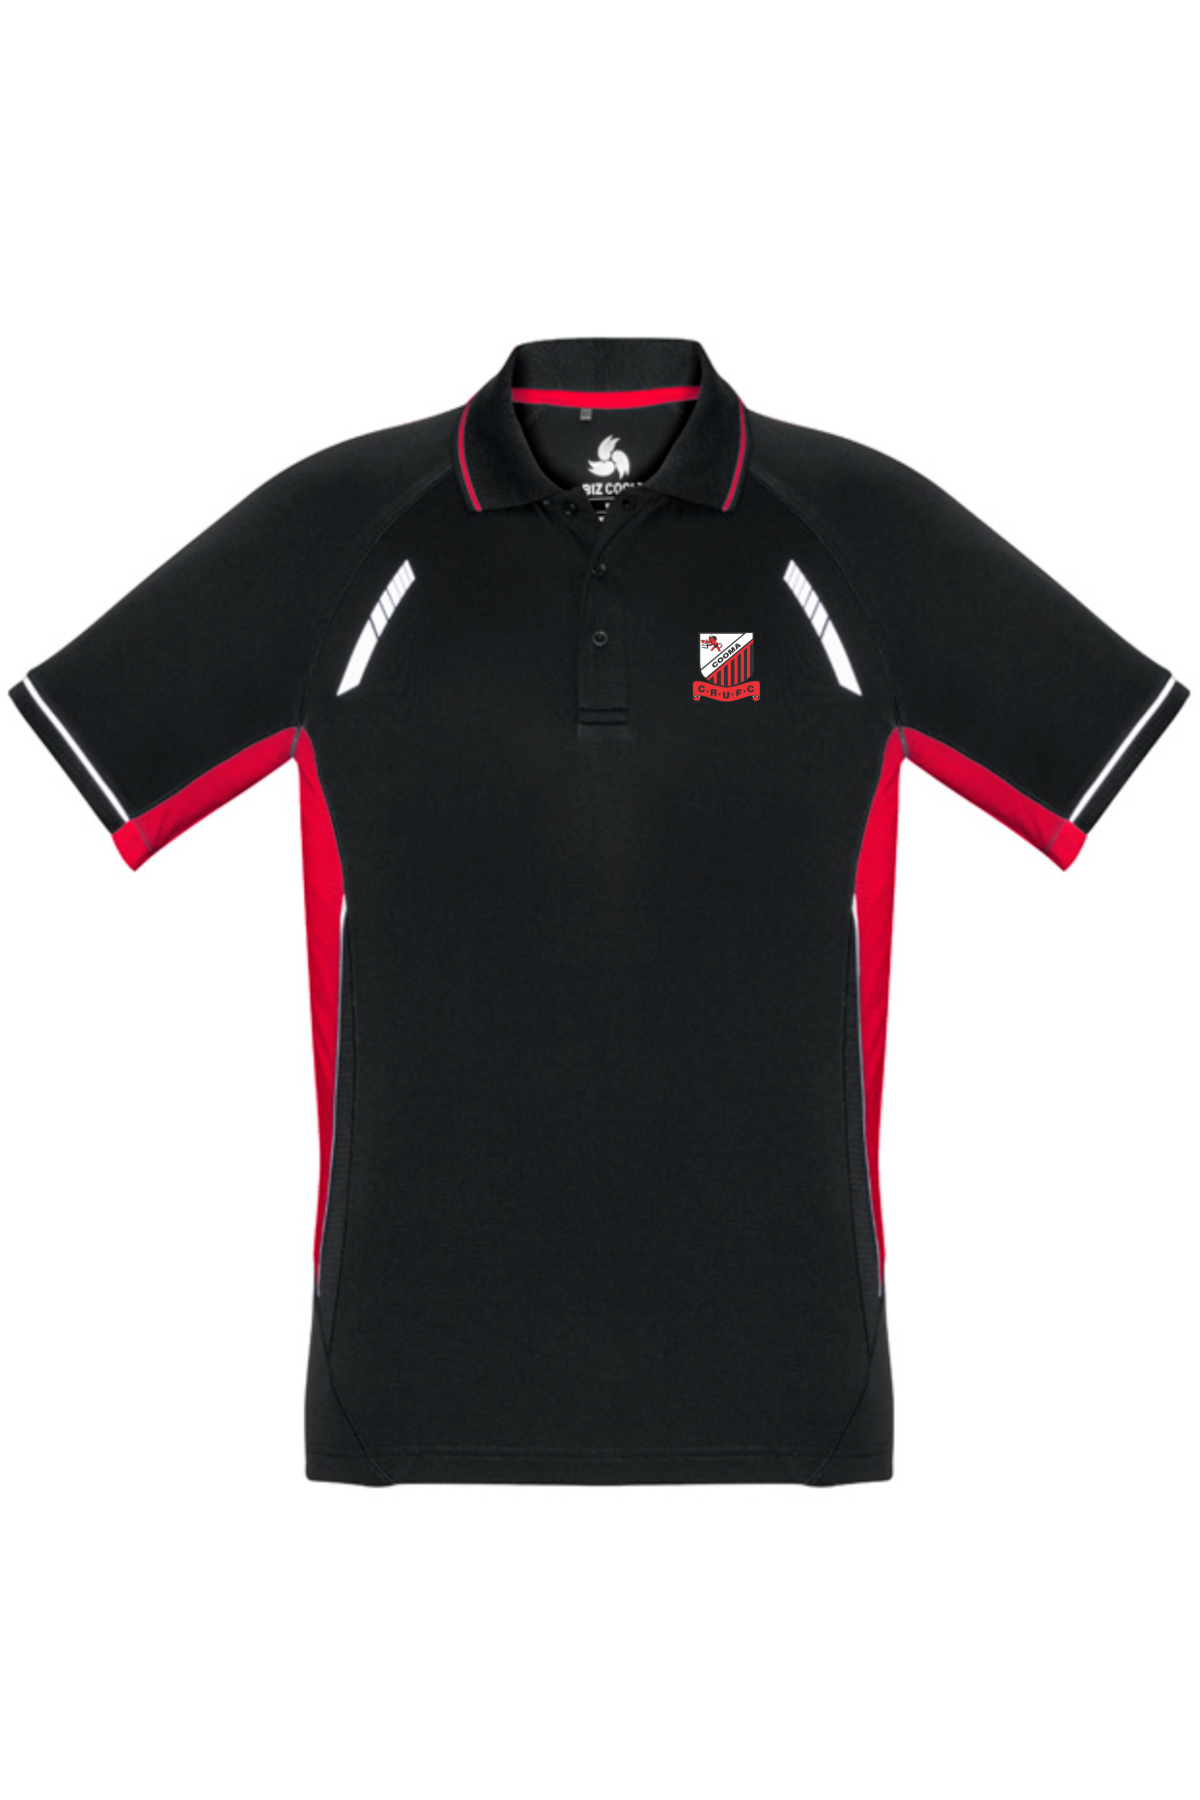 Cooma Rugby Red Devils Kids Polo